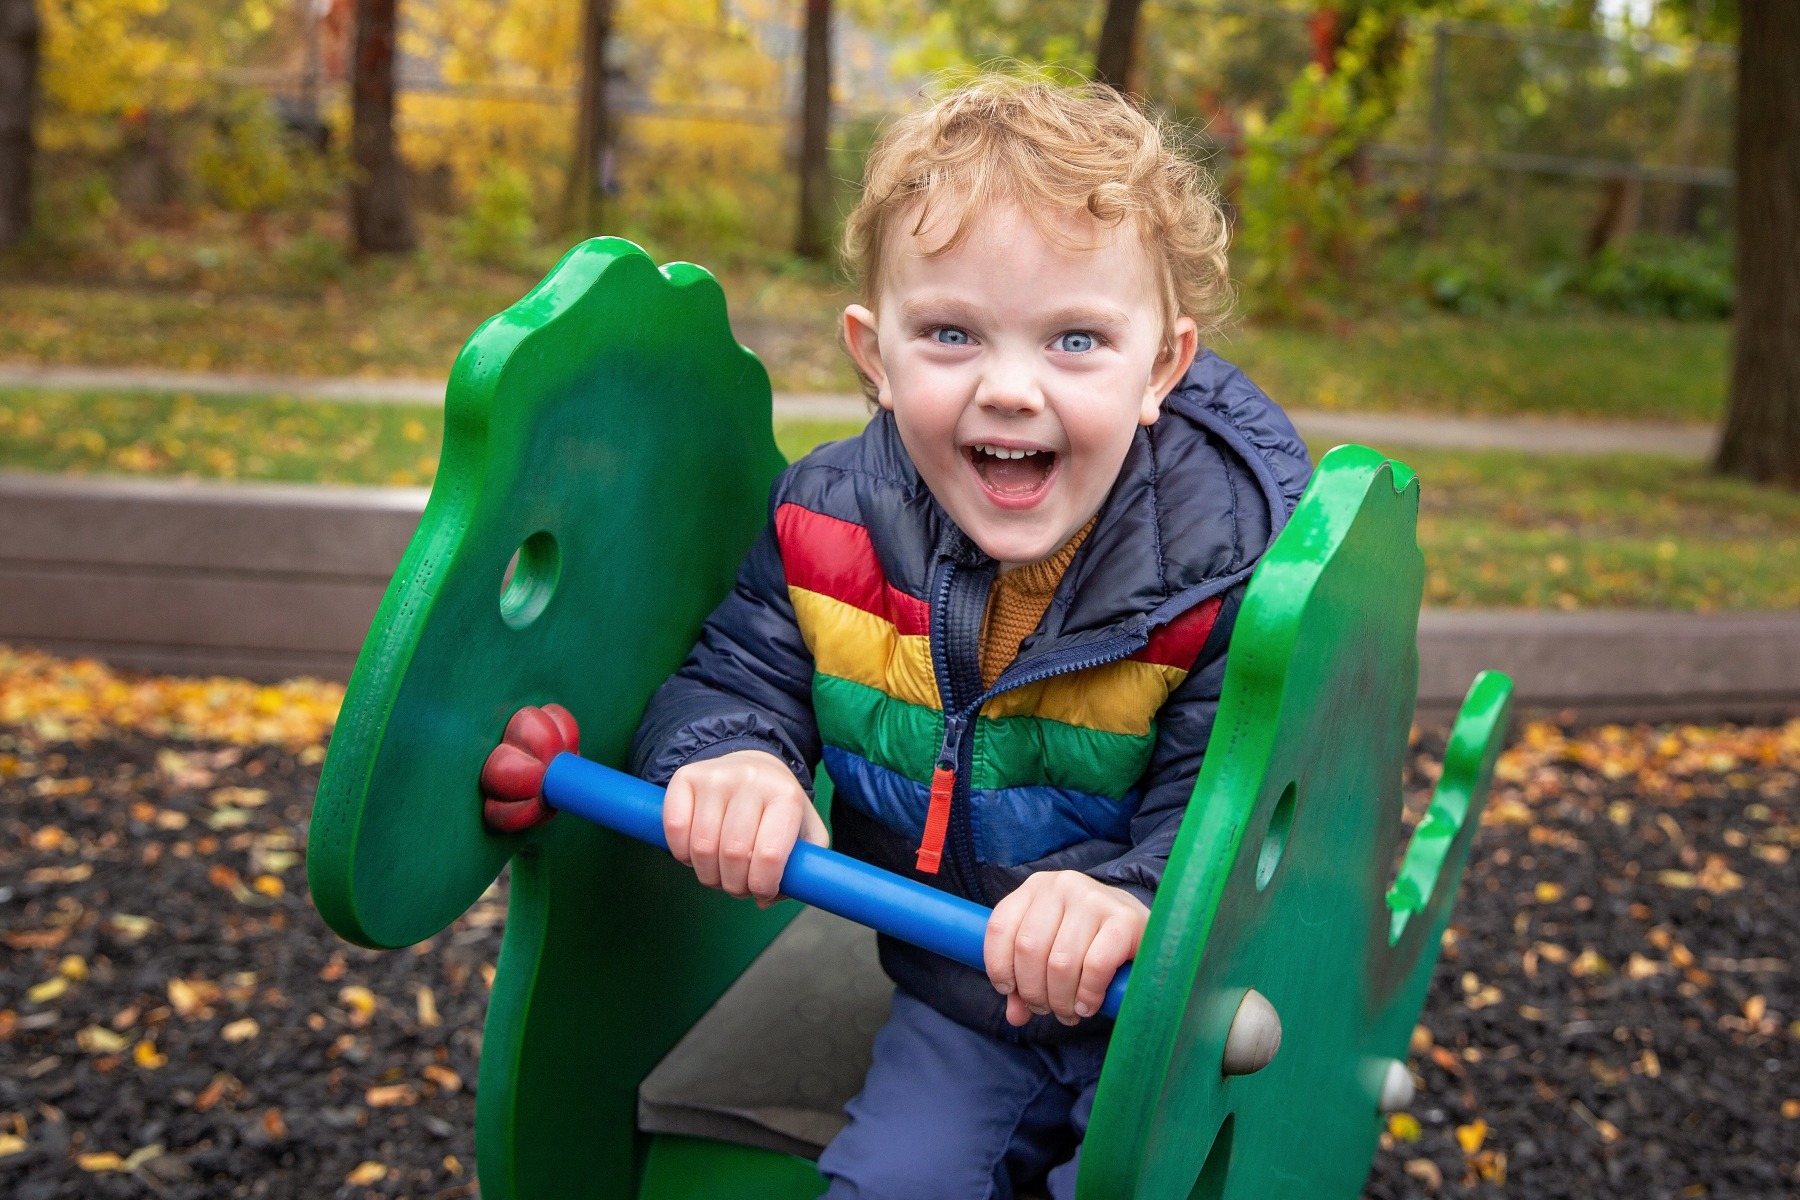 blond haired boy plays on a green playground rocker